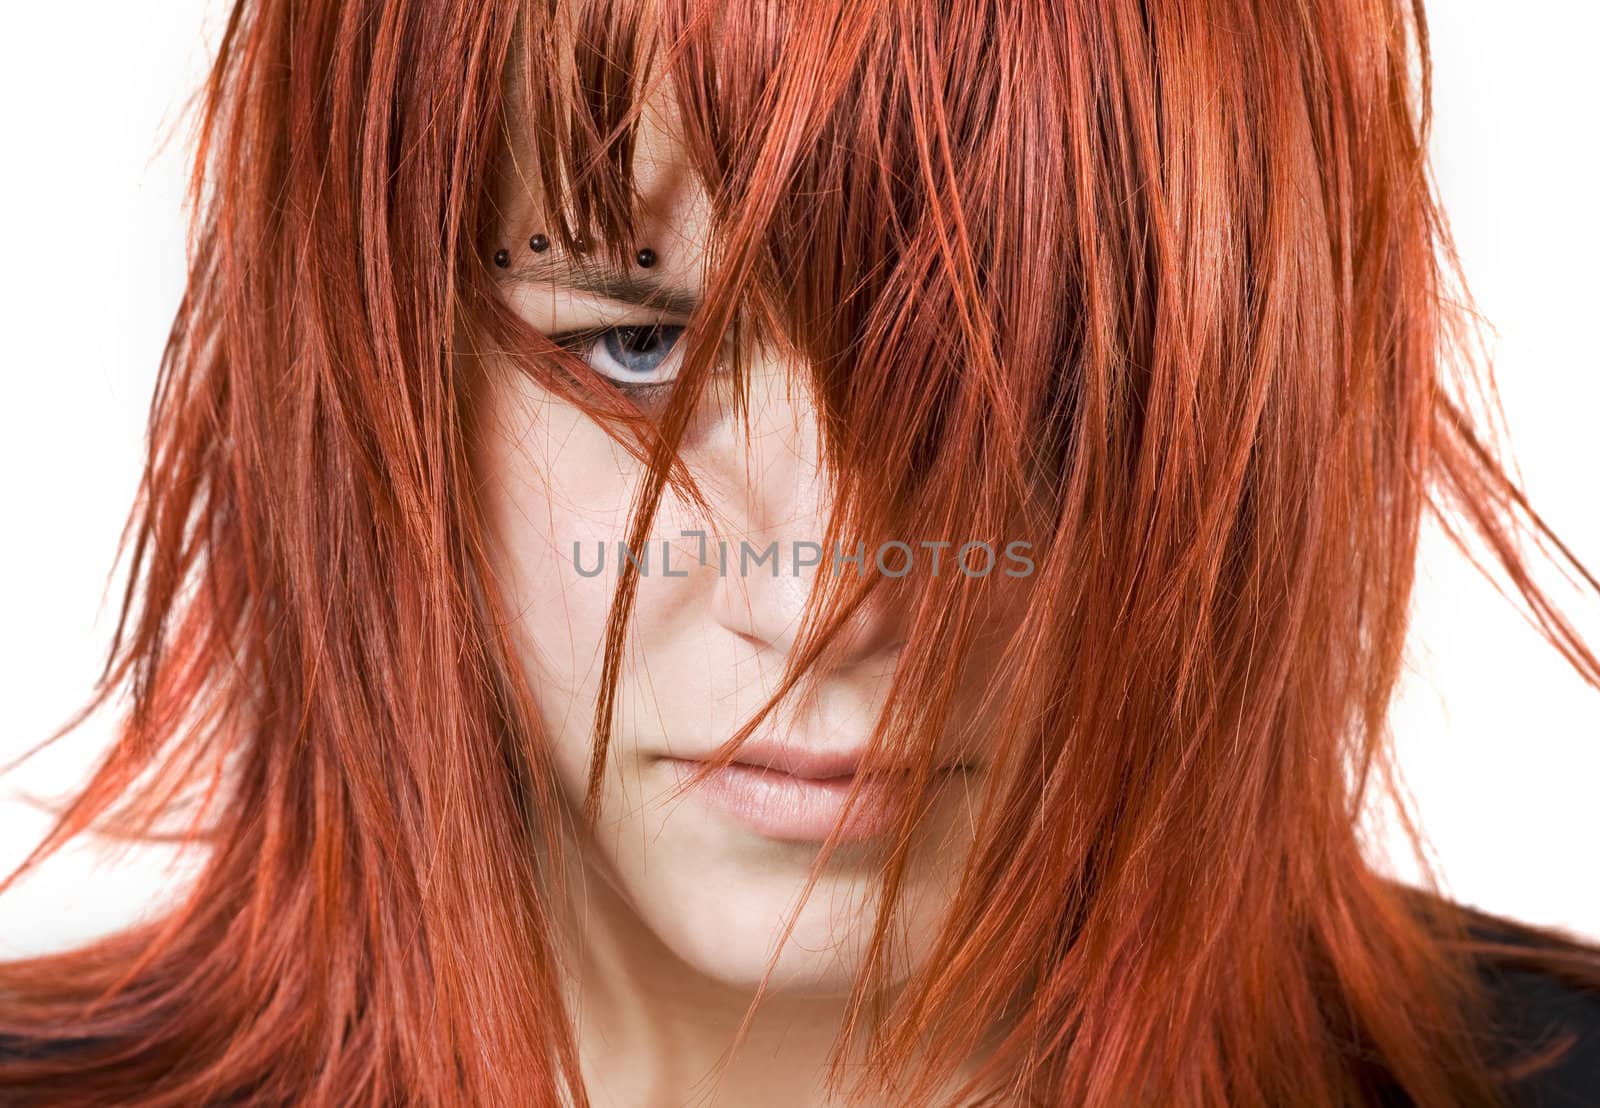 Cute redhead girl looking aggressively at the camera with messy or distressed hair.

Studio shot.